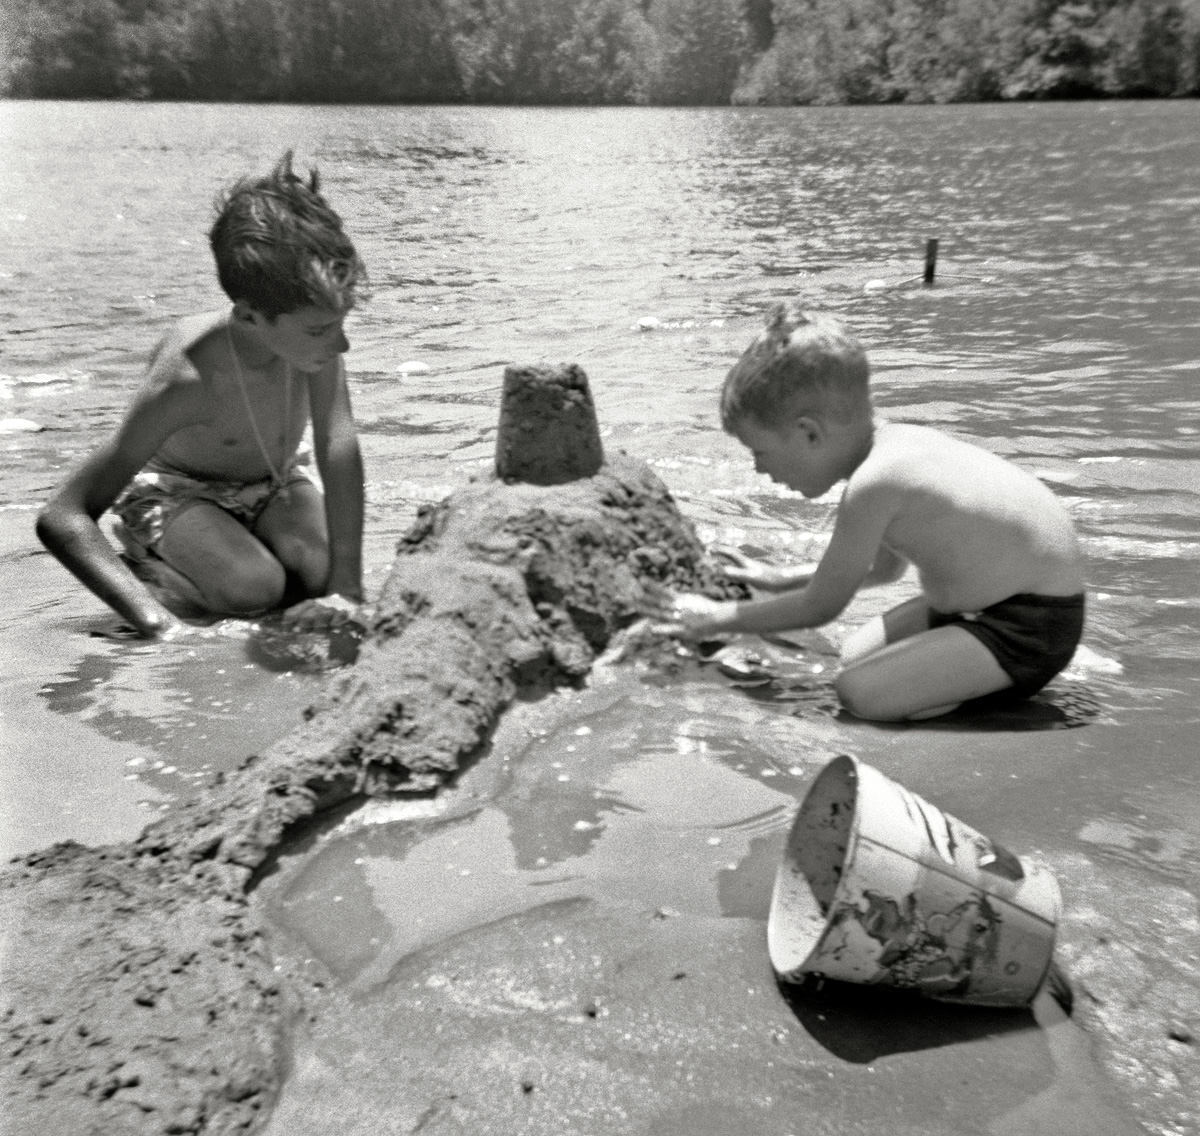 Once again it's time to head up to the Russian River and some vacation fun with the most awesome toy ever to be placed in the hands of a young boy: mud. This is probably around 1950, so my brother is about 13 and I'm about 4 as we put the finishing touches on our impregnable shoreline fortress. Well actually, even more fun was in store when the River Queen motor launch (think Disneyland Jungle Ride boats) came along and its mini-tsunamis destroyed the ever-loving heck out of it. This shot also reveals the limitations of snapshot cameras everyone had to put up with back then, even a comparatively good one like my sister's Kodak Duaflex: we're not really that close but we're still out of focus, and the slow shutter speed meant additional blurriness from just the jiggle of pressing down the shutter release. But with the standard 3x3 print you got back from the drug store, you probably wouldn't notice. Interesting that, proportionally speaking, my gut is roughly in the same state today. View full size.